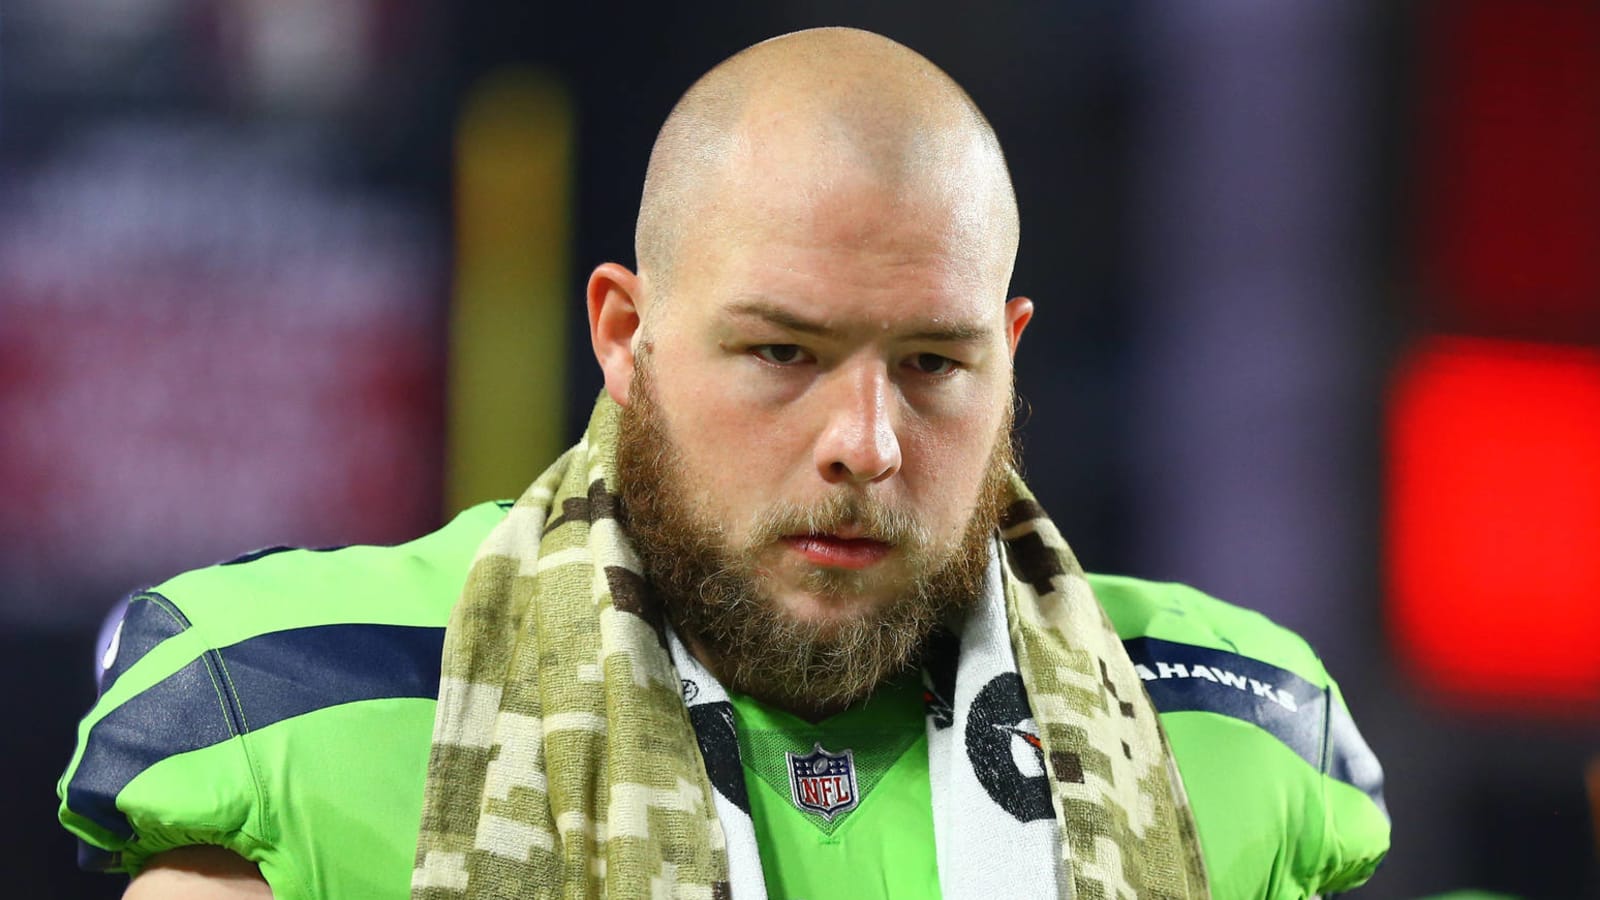 Justin Britt announces he's signing with Texans